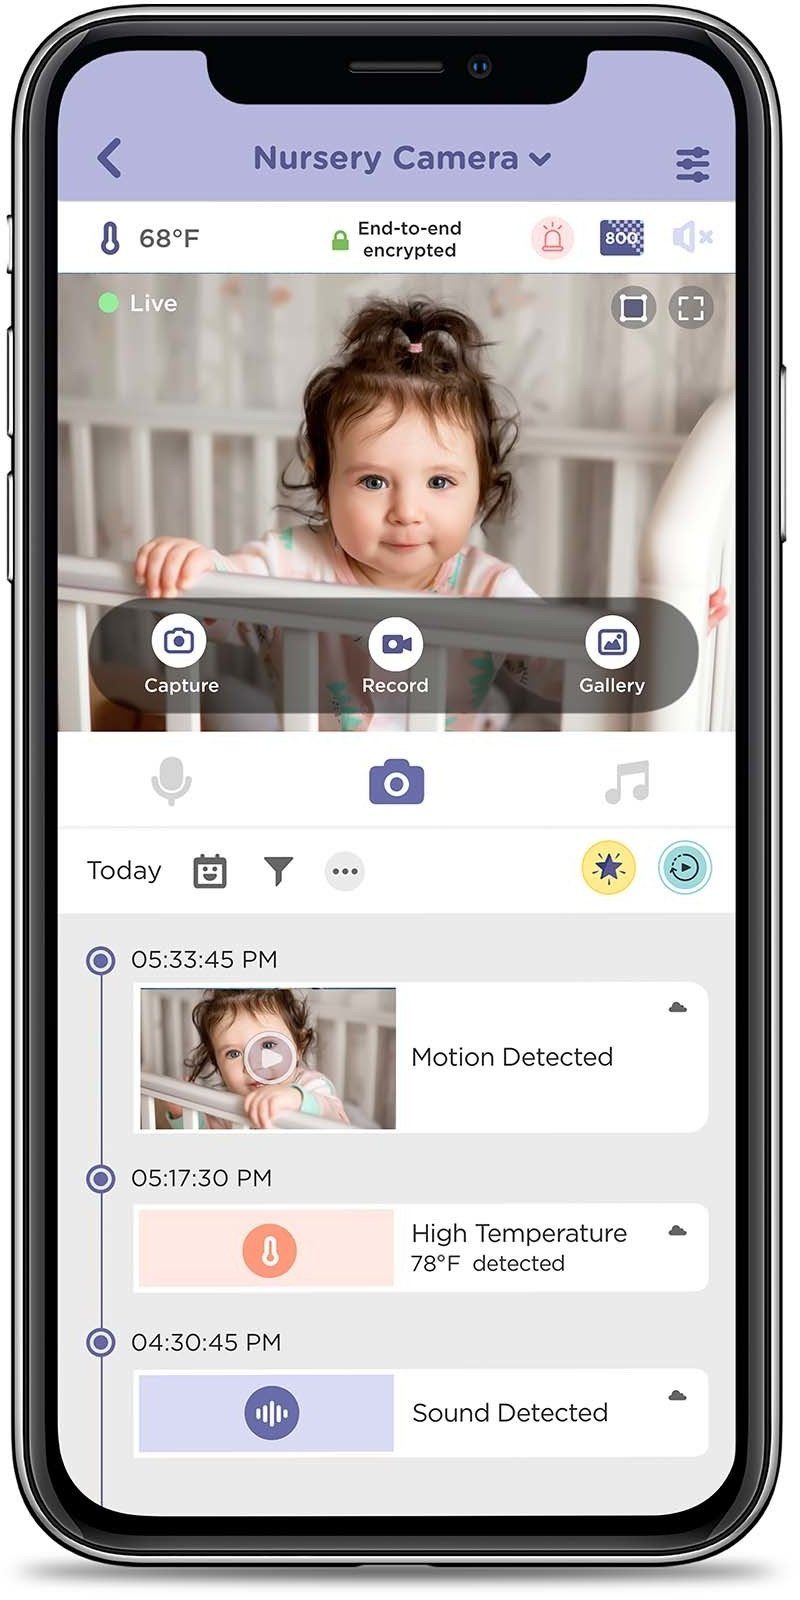 Pal Connected Hubble Connect Video-Babyphone Nursery